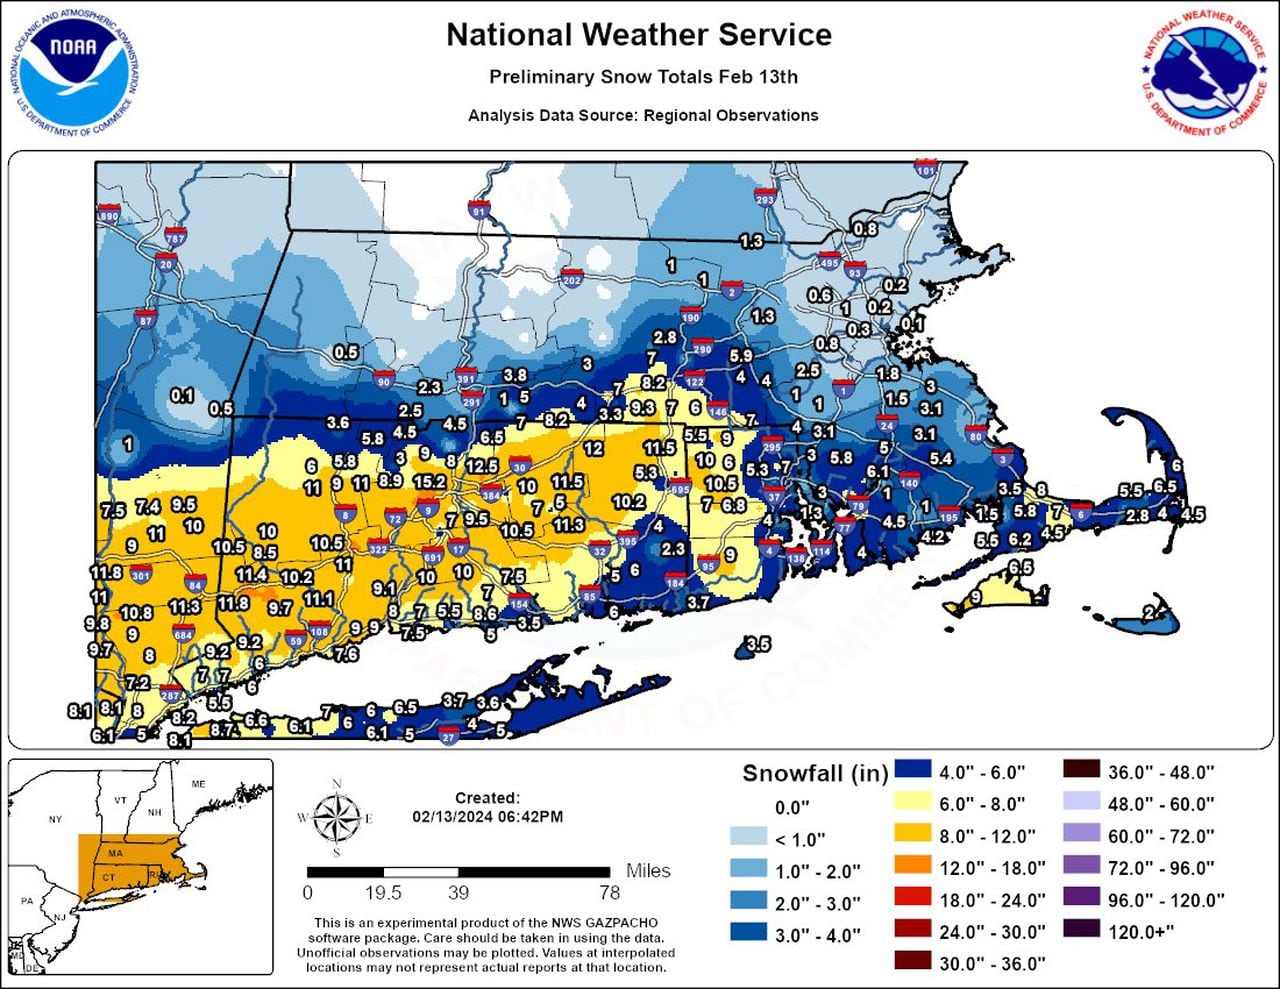 Snowfall totals for Tuesday, Feb. 13